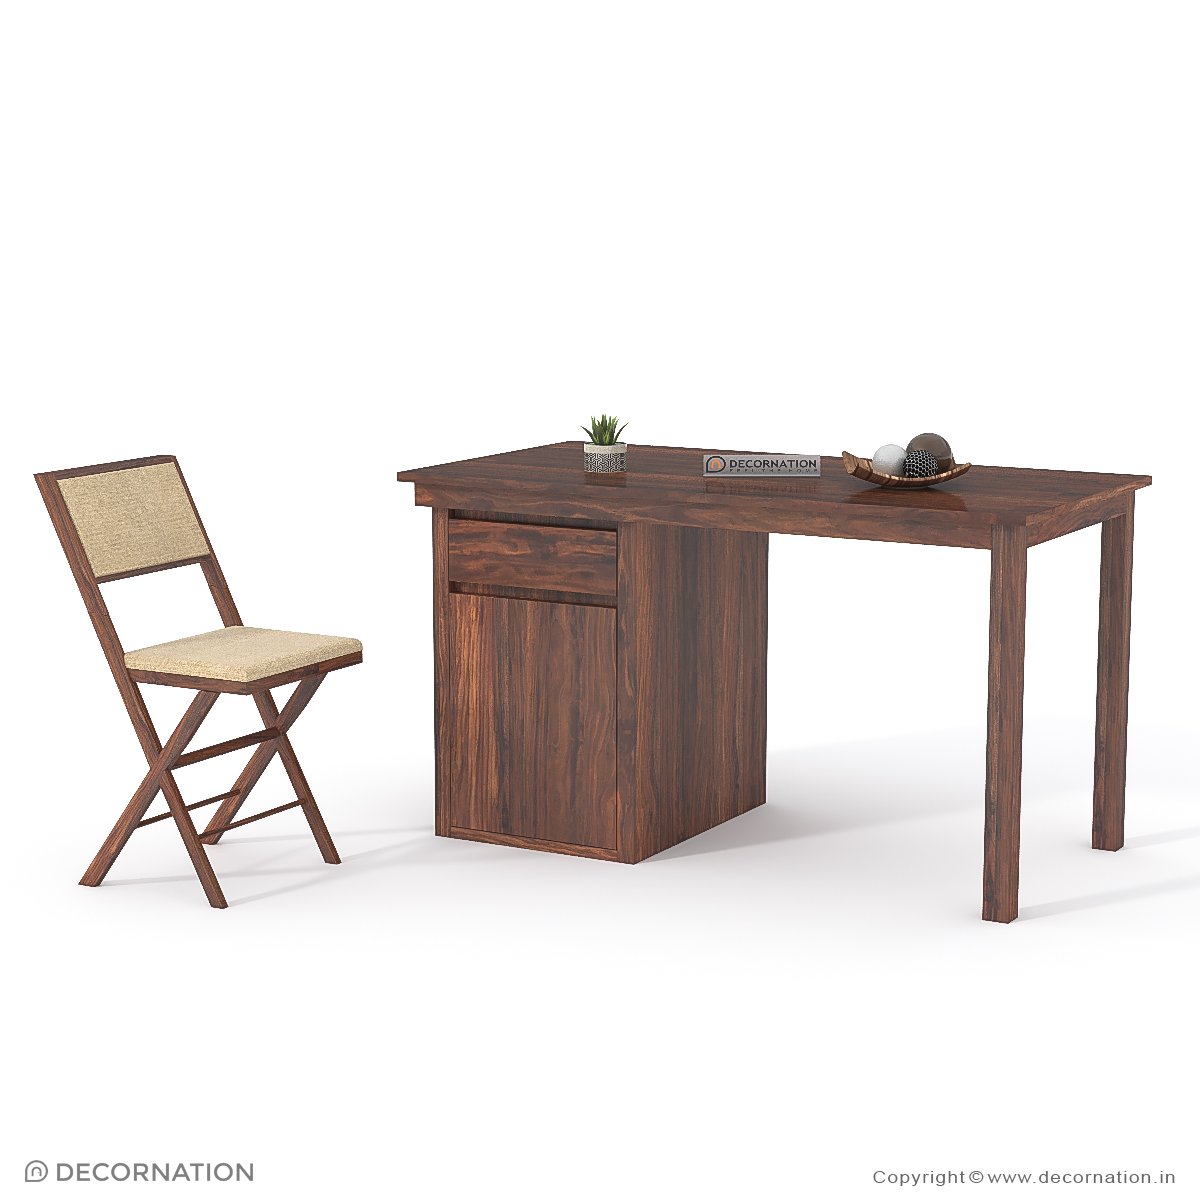 Flavia Wooden Computer Table with Storage - Decornation